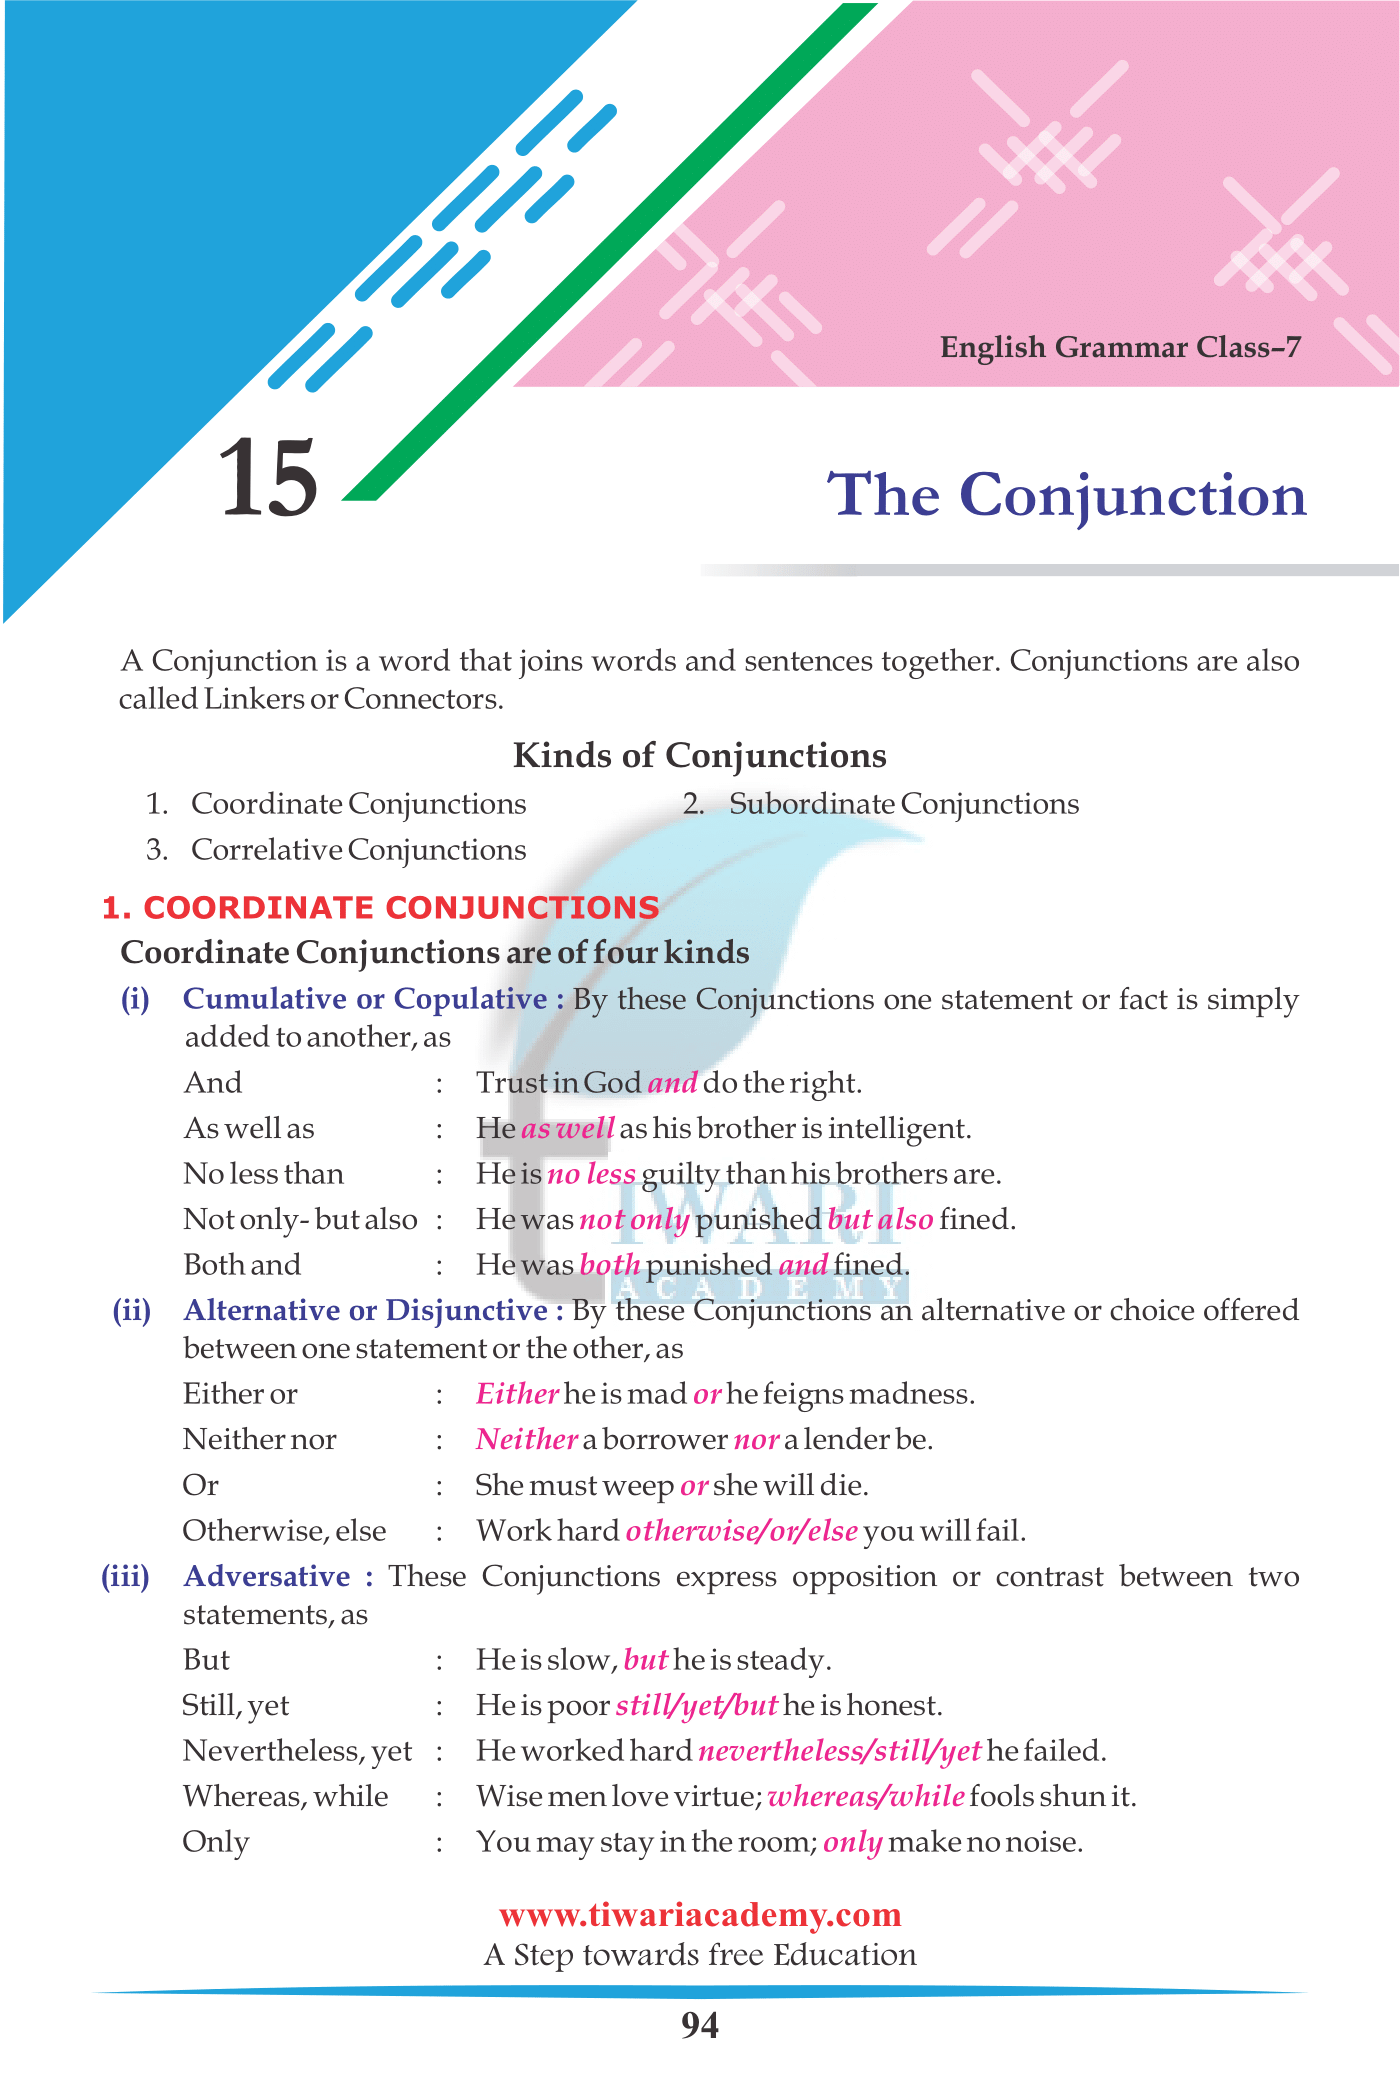 Class 7 English Grammar Chapter 15 The Conjunction for session 2023-2024